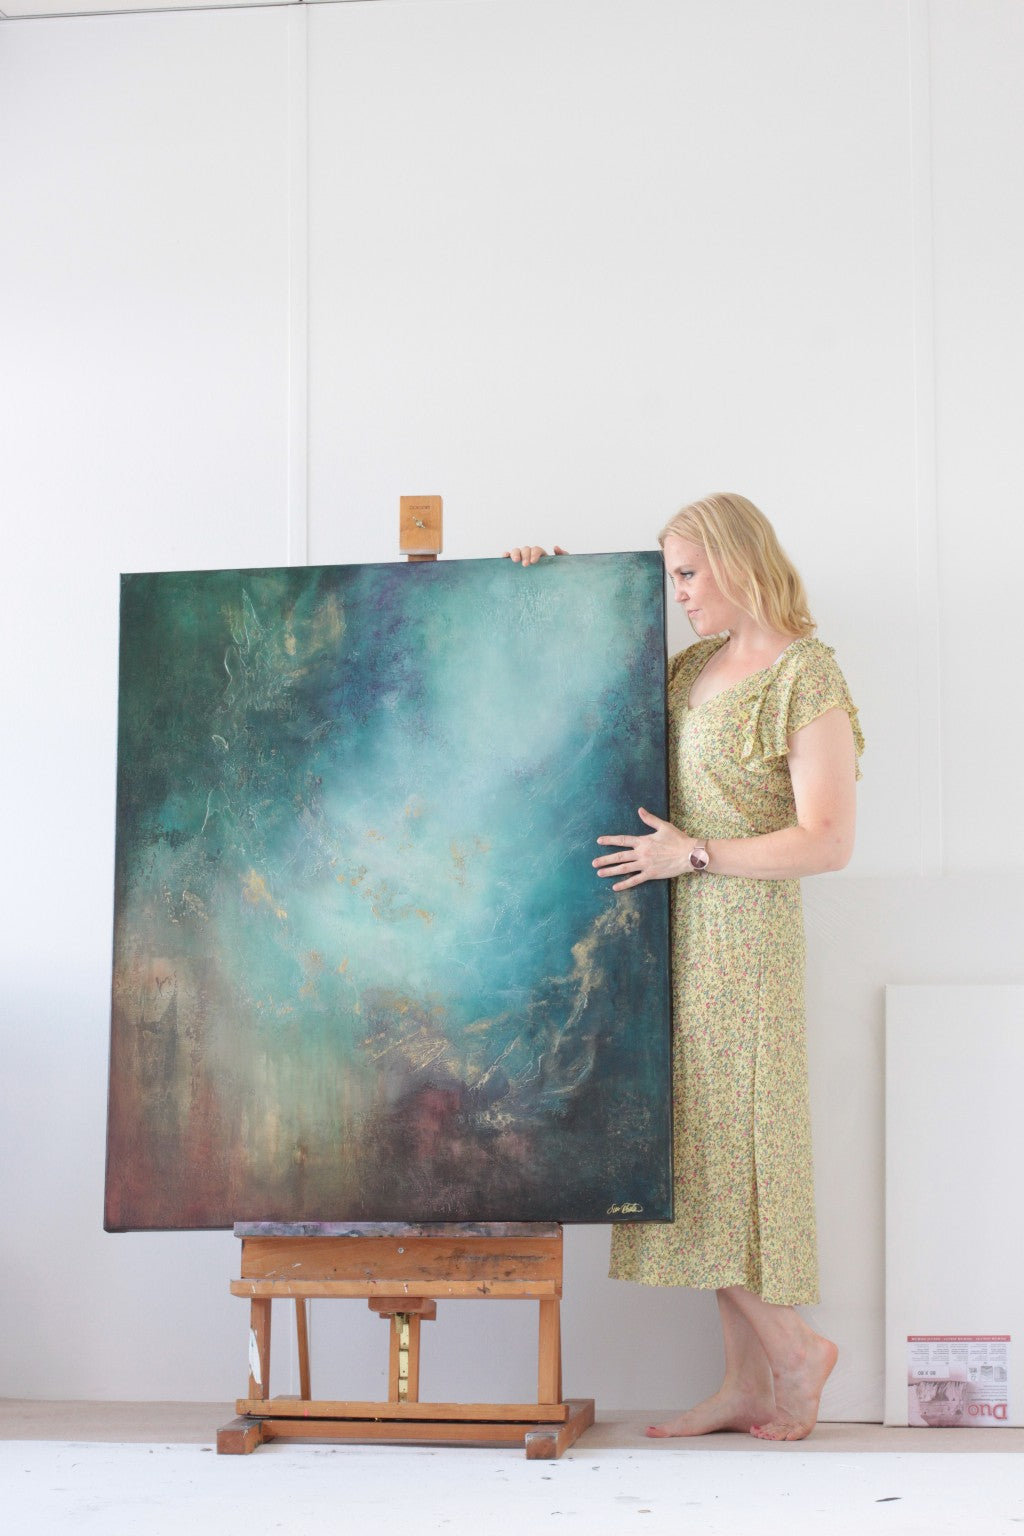 Sensitive photo of the female artist touching the large abstract painting.